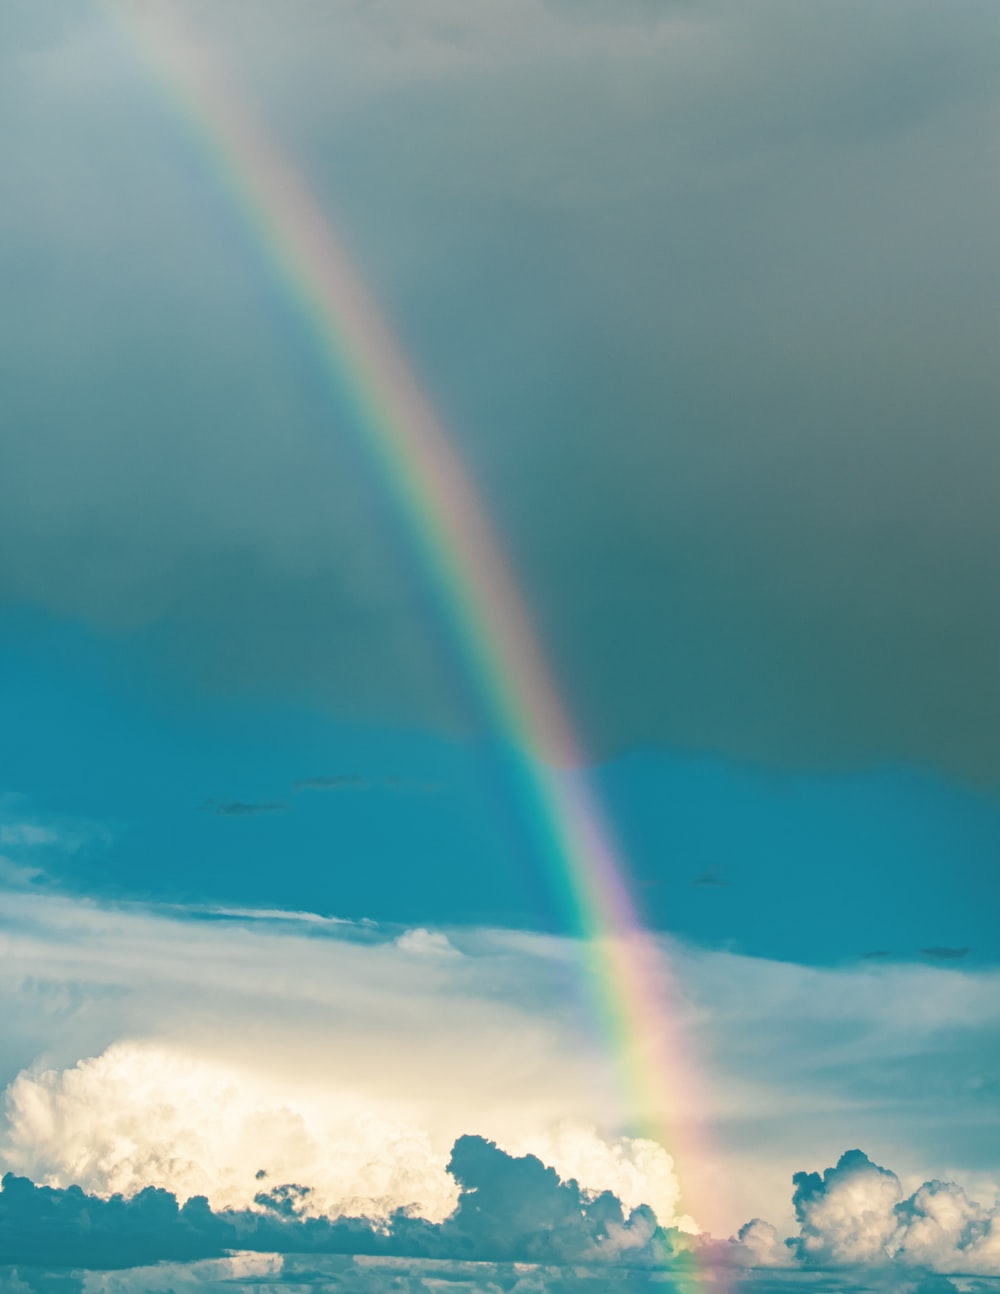 Rainbow Cloud Picture. Download Free Image